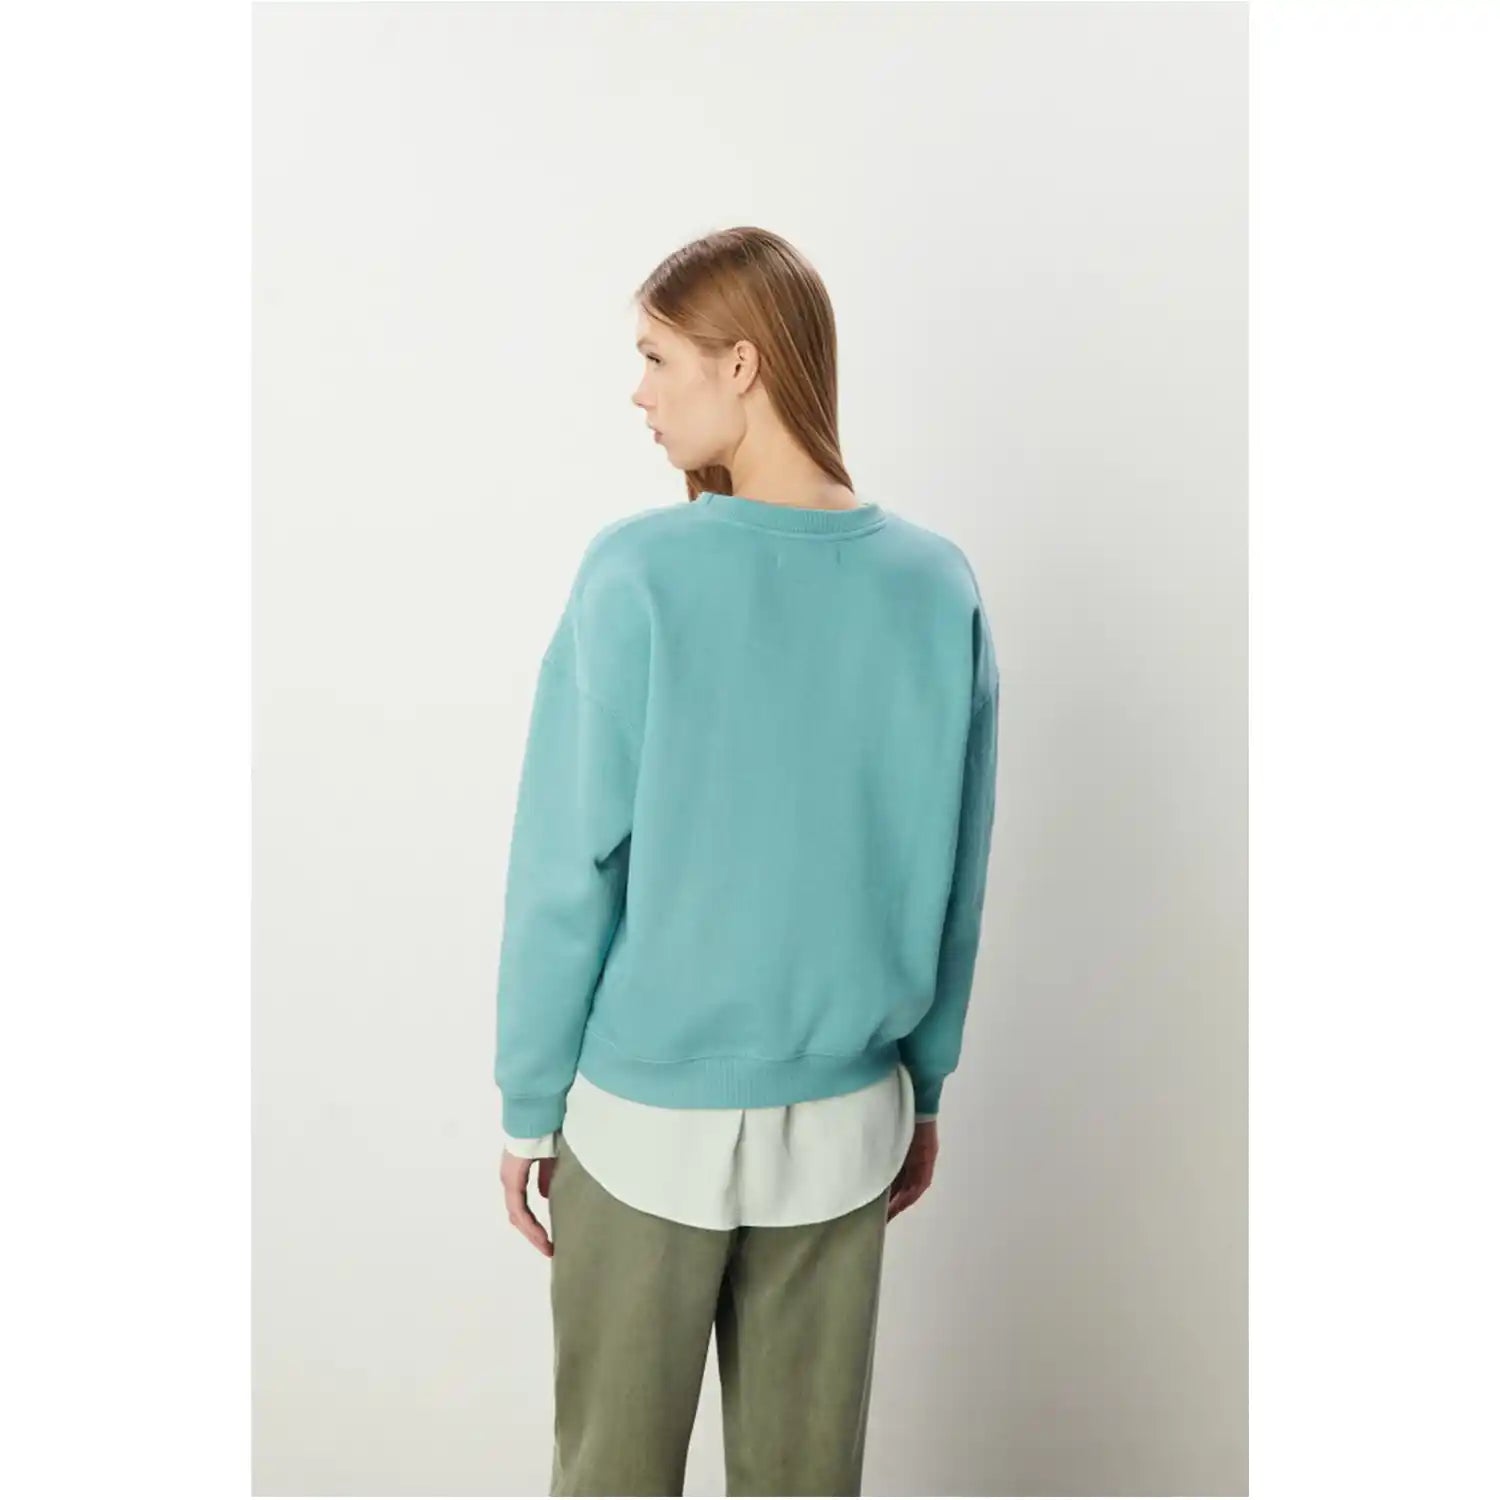 Sfera Embroidered Sweatshirt - Teal 3 Shaws Department Stores